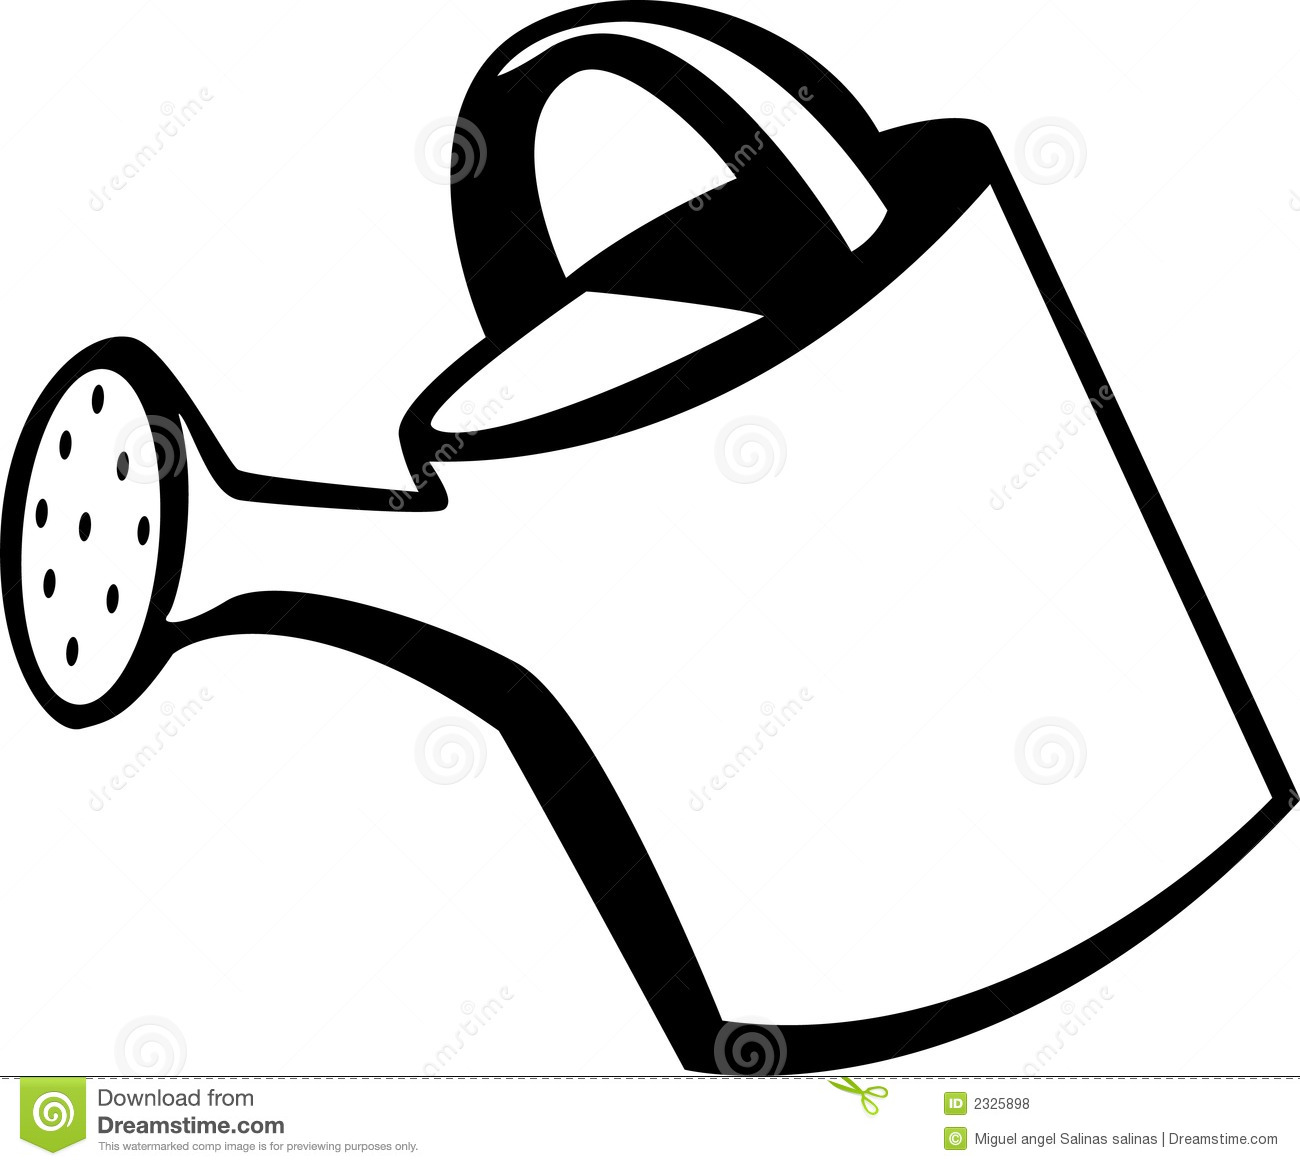 Watering Can Vector Illustration Royalty Free Stock Photos   Image